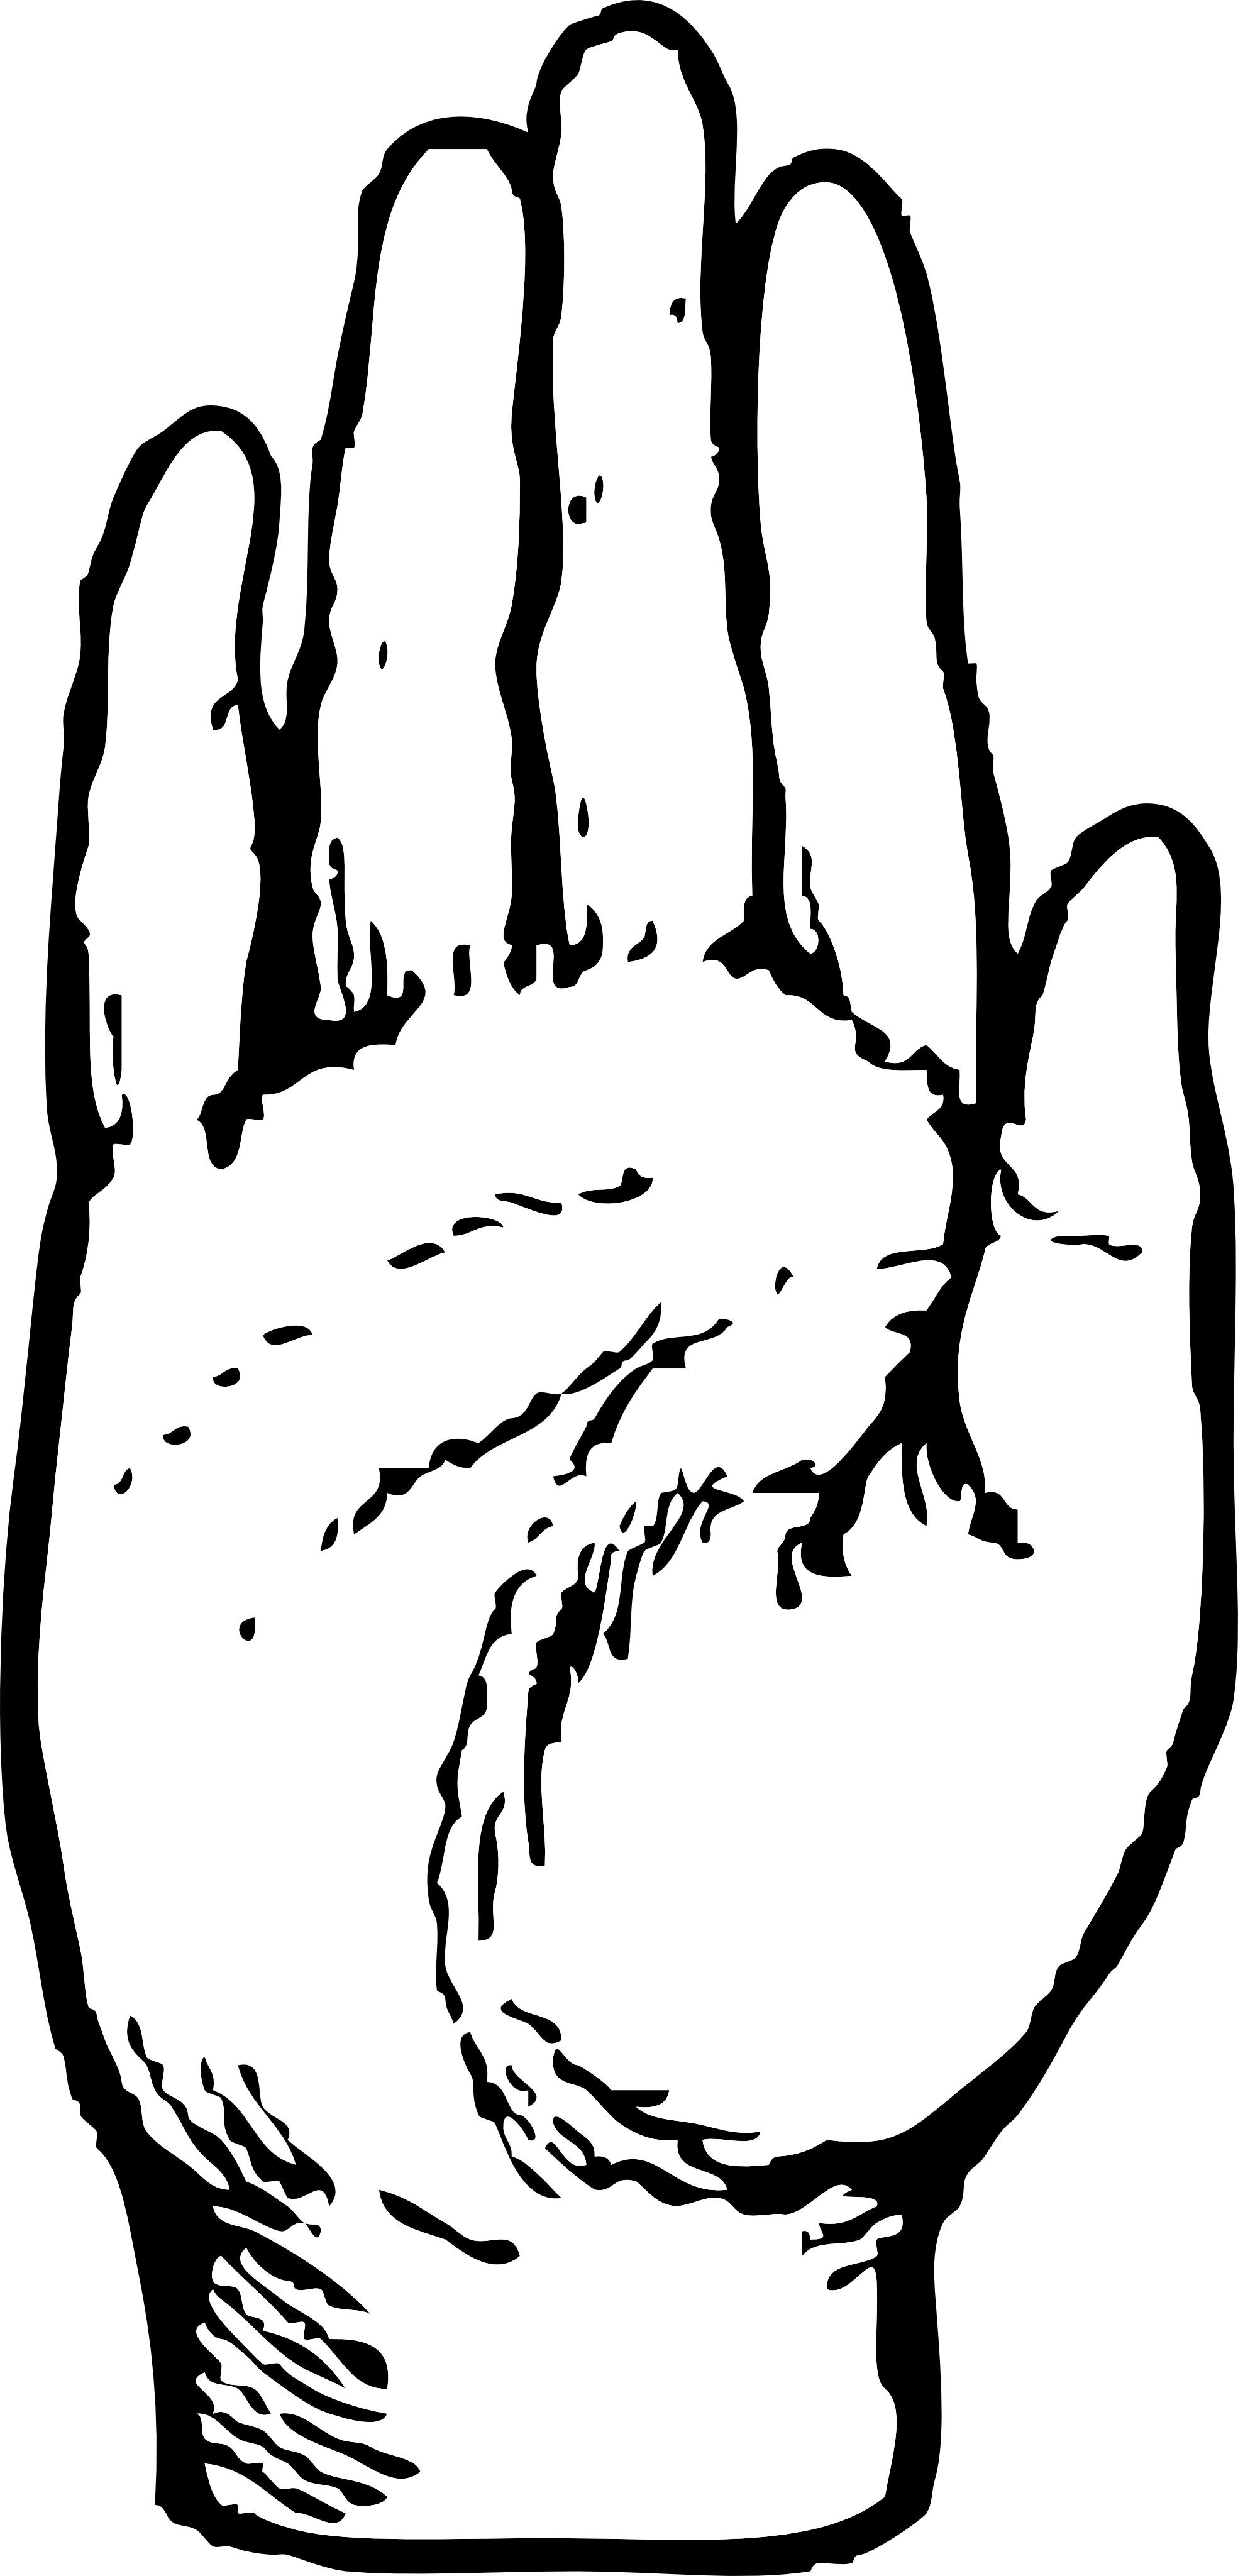 Open right hand clipart